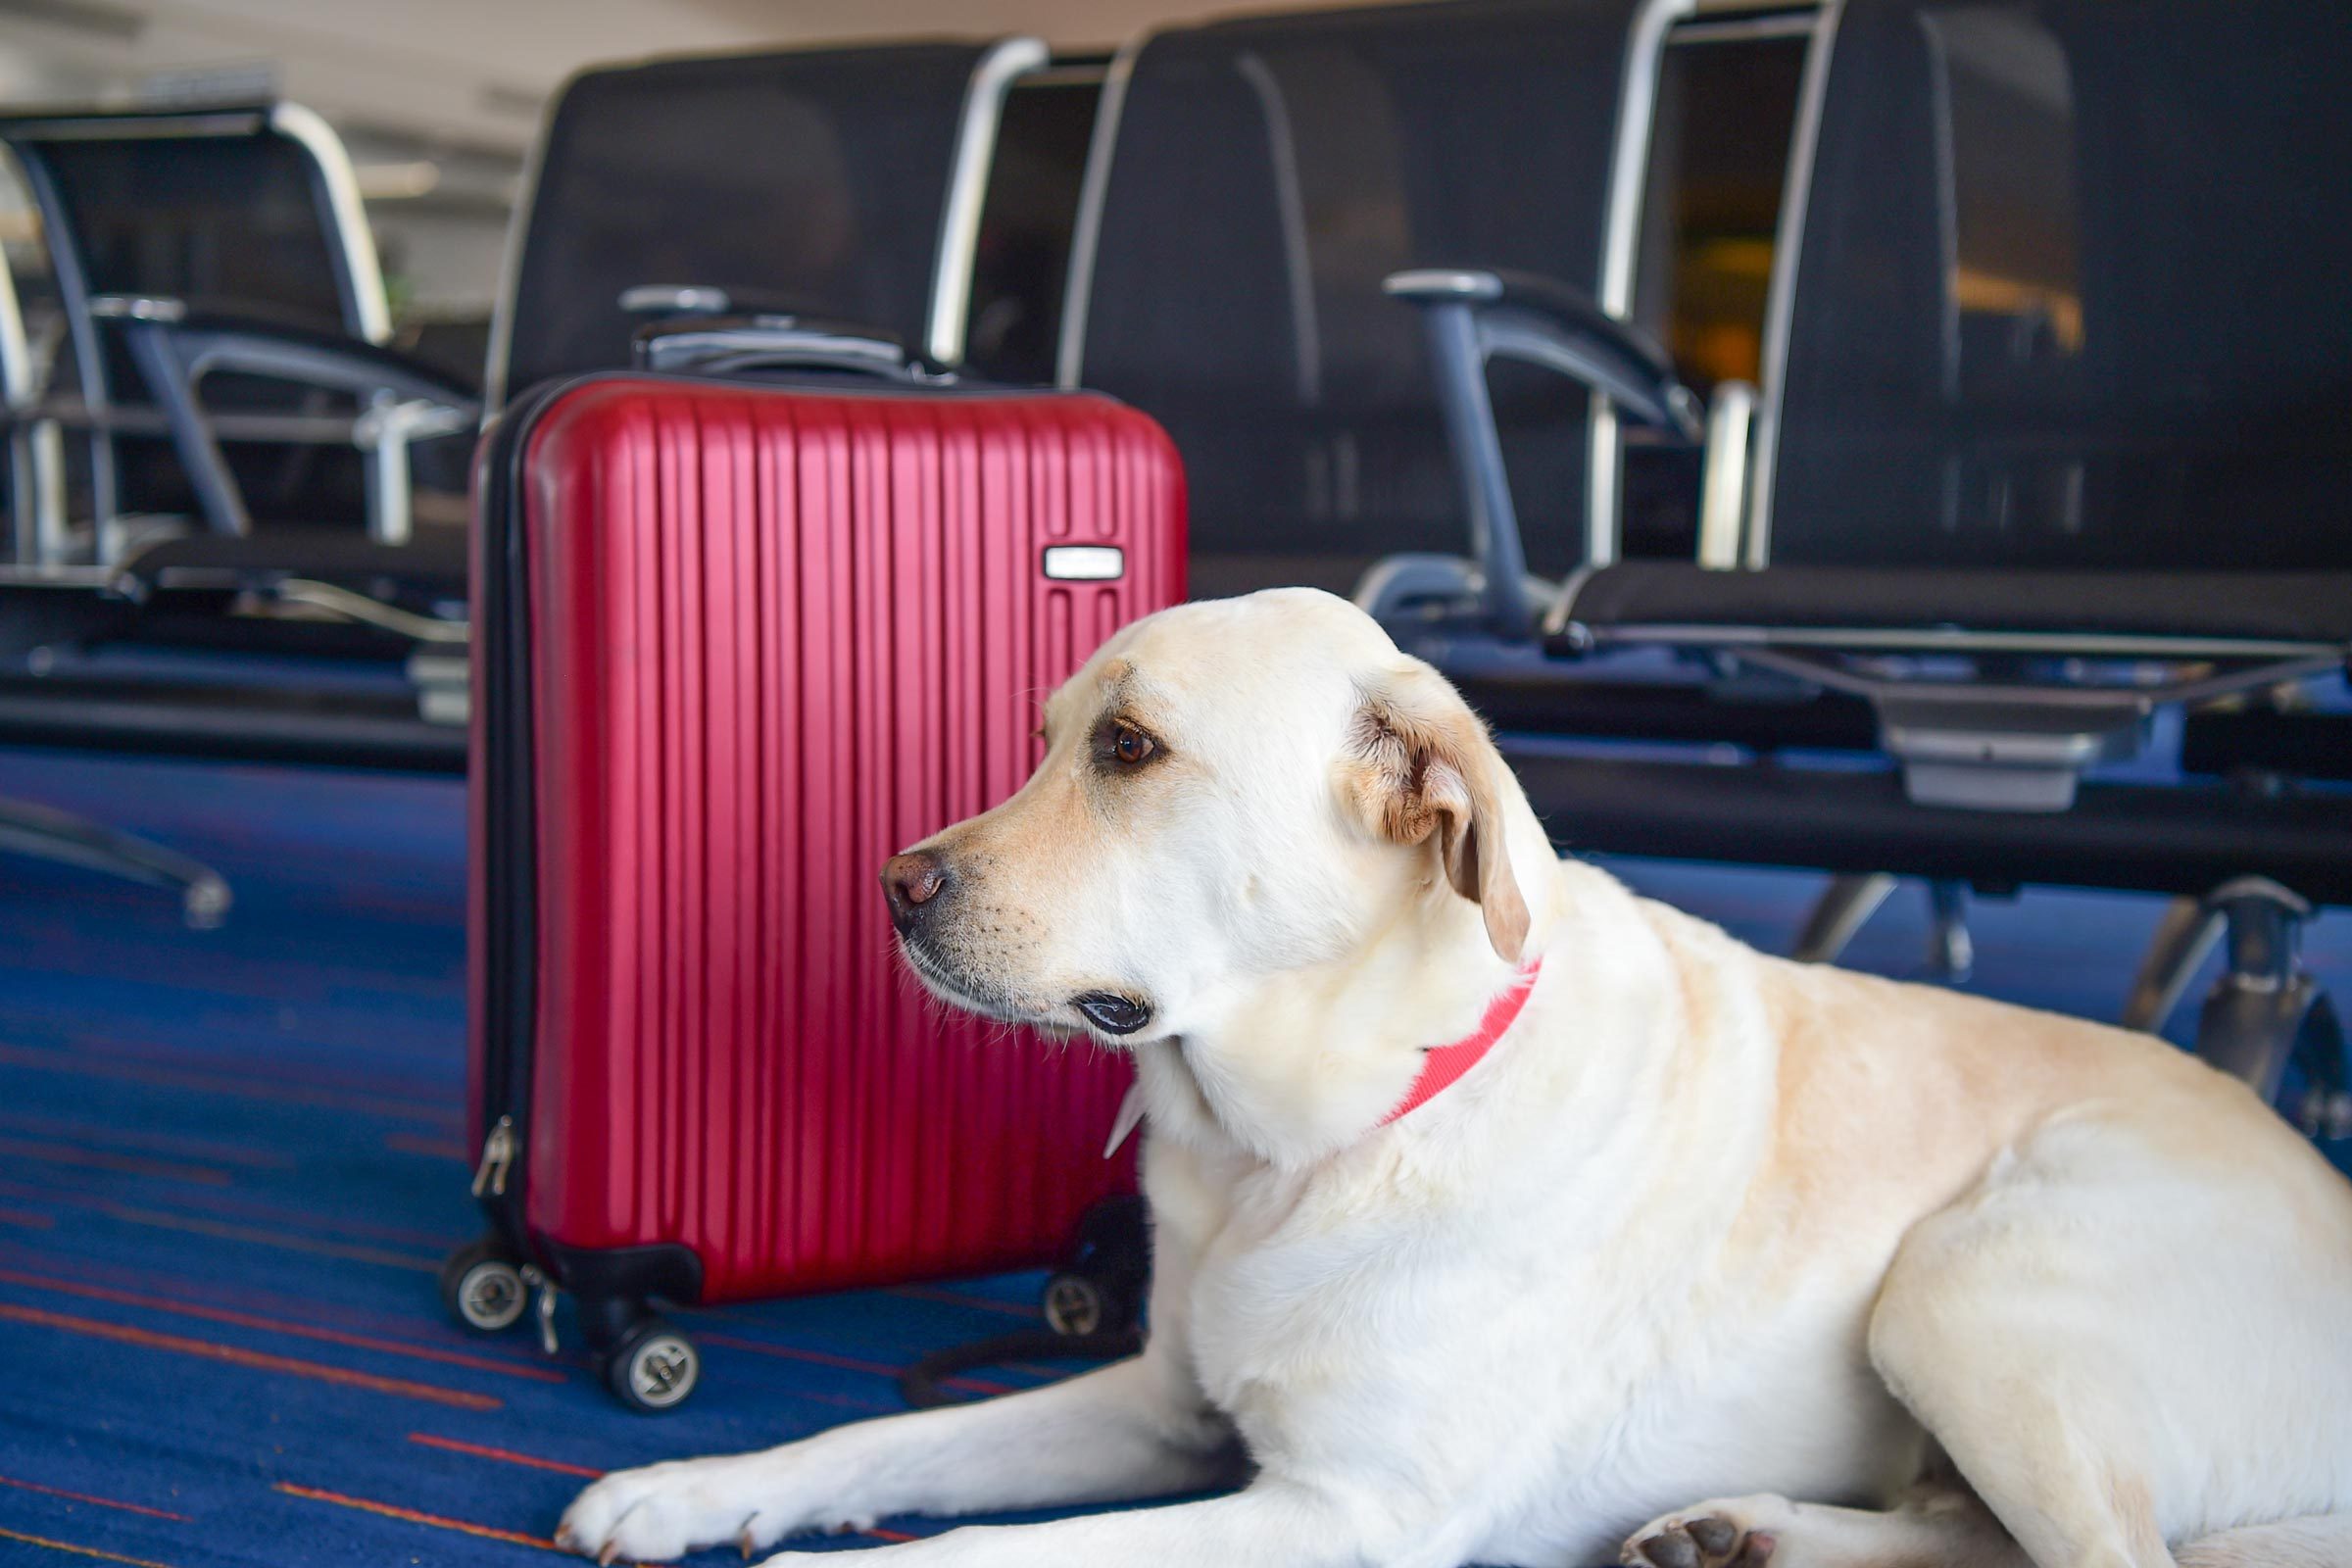 The 10 Most Pet-Friendly Airlines for 